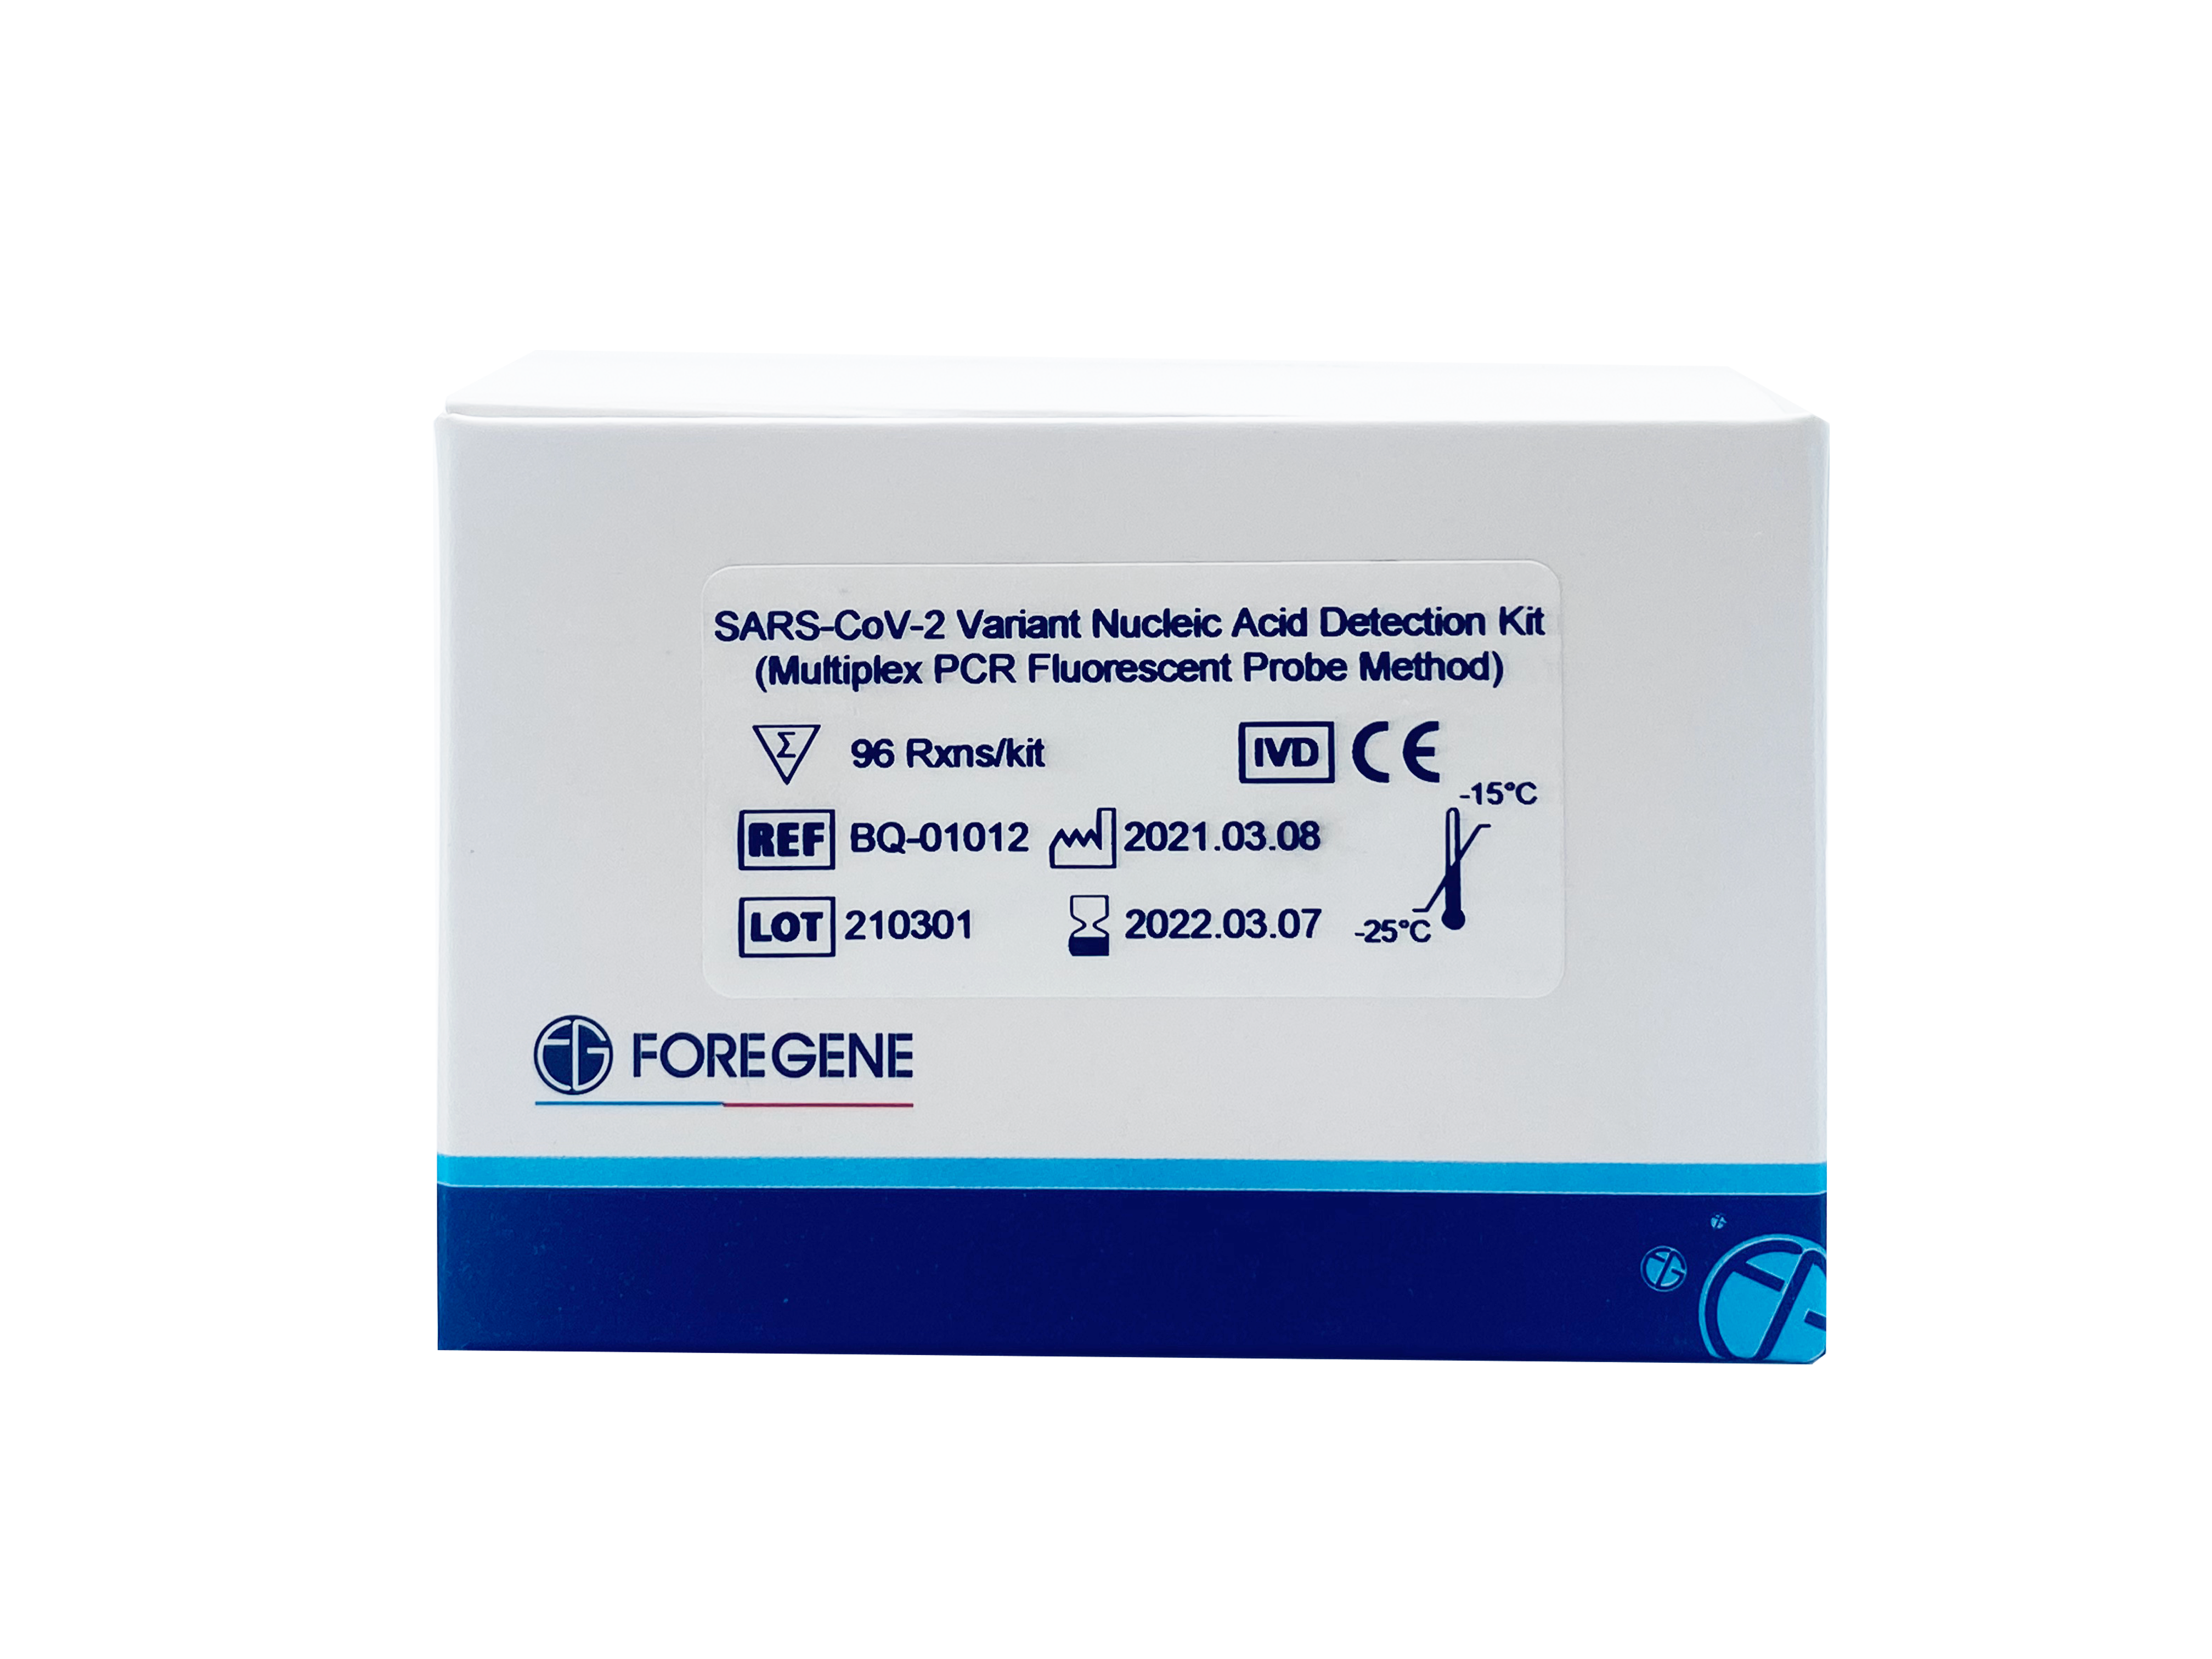 OEM/ODM China Nucleic Acid Detection Kit - SARS-CoV-2 Variant Nucleic Acid Detection Kit II (Multiplex PCR Fluorescent Probe Method)-for detection of variants from UK,South Africa, Brazil, and Ind...